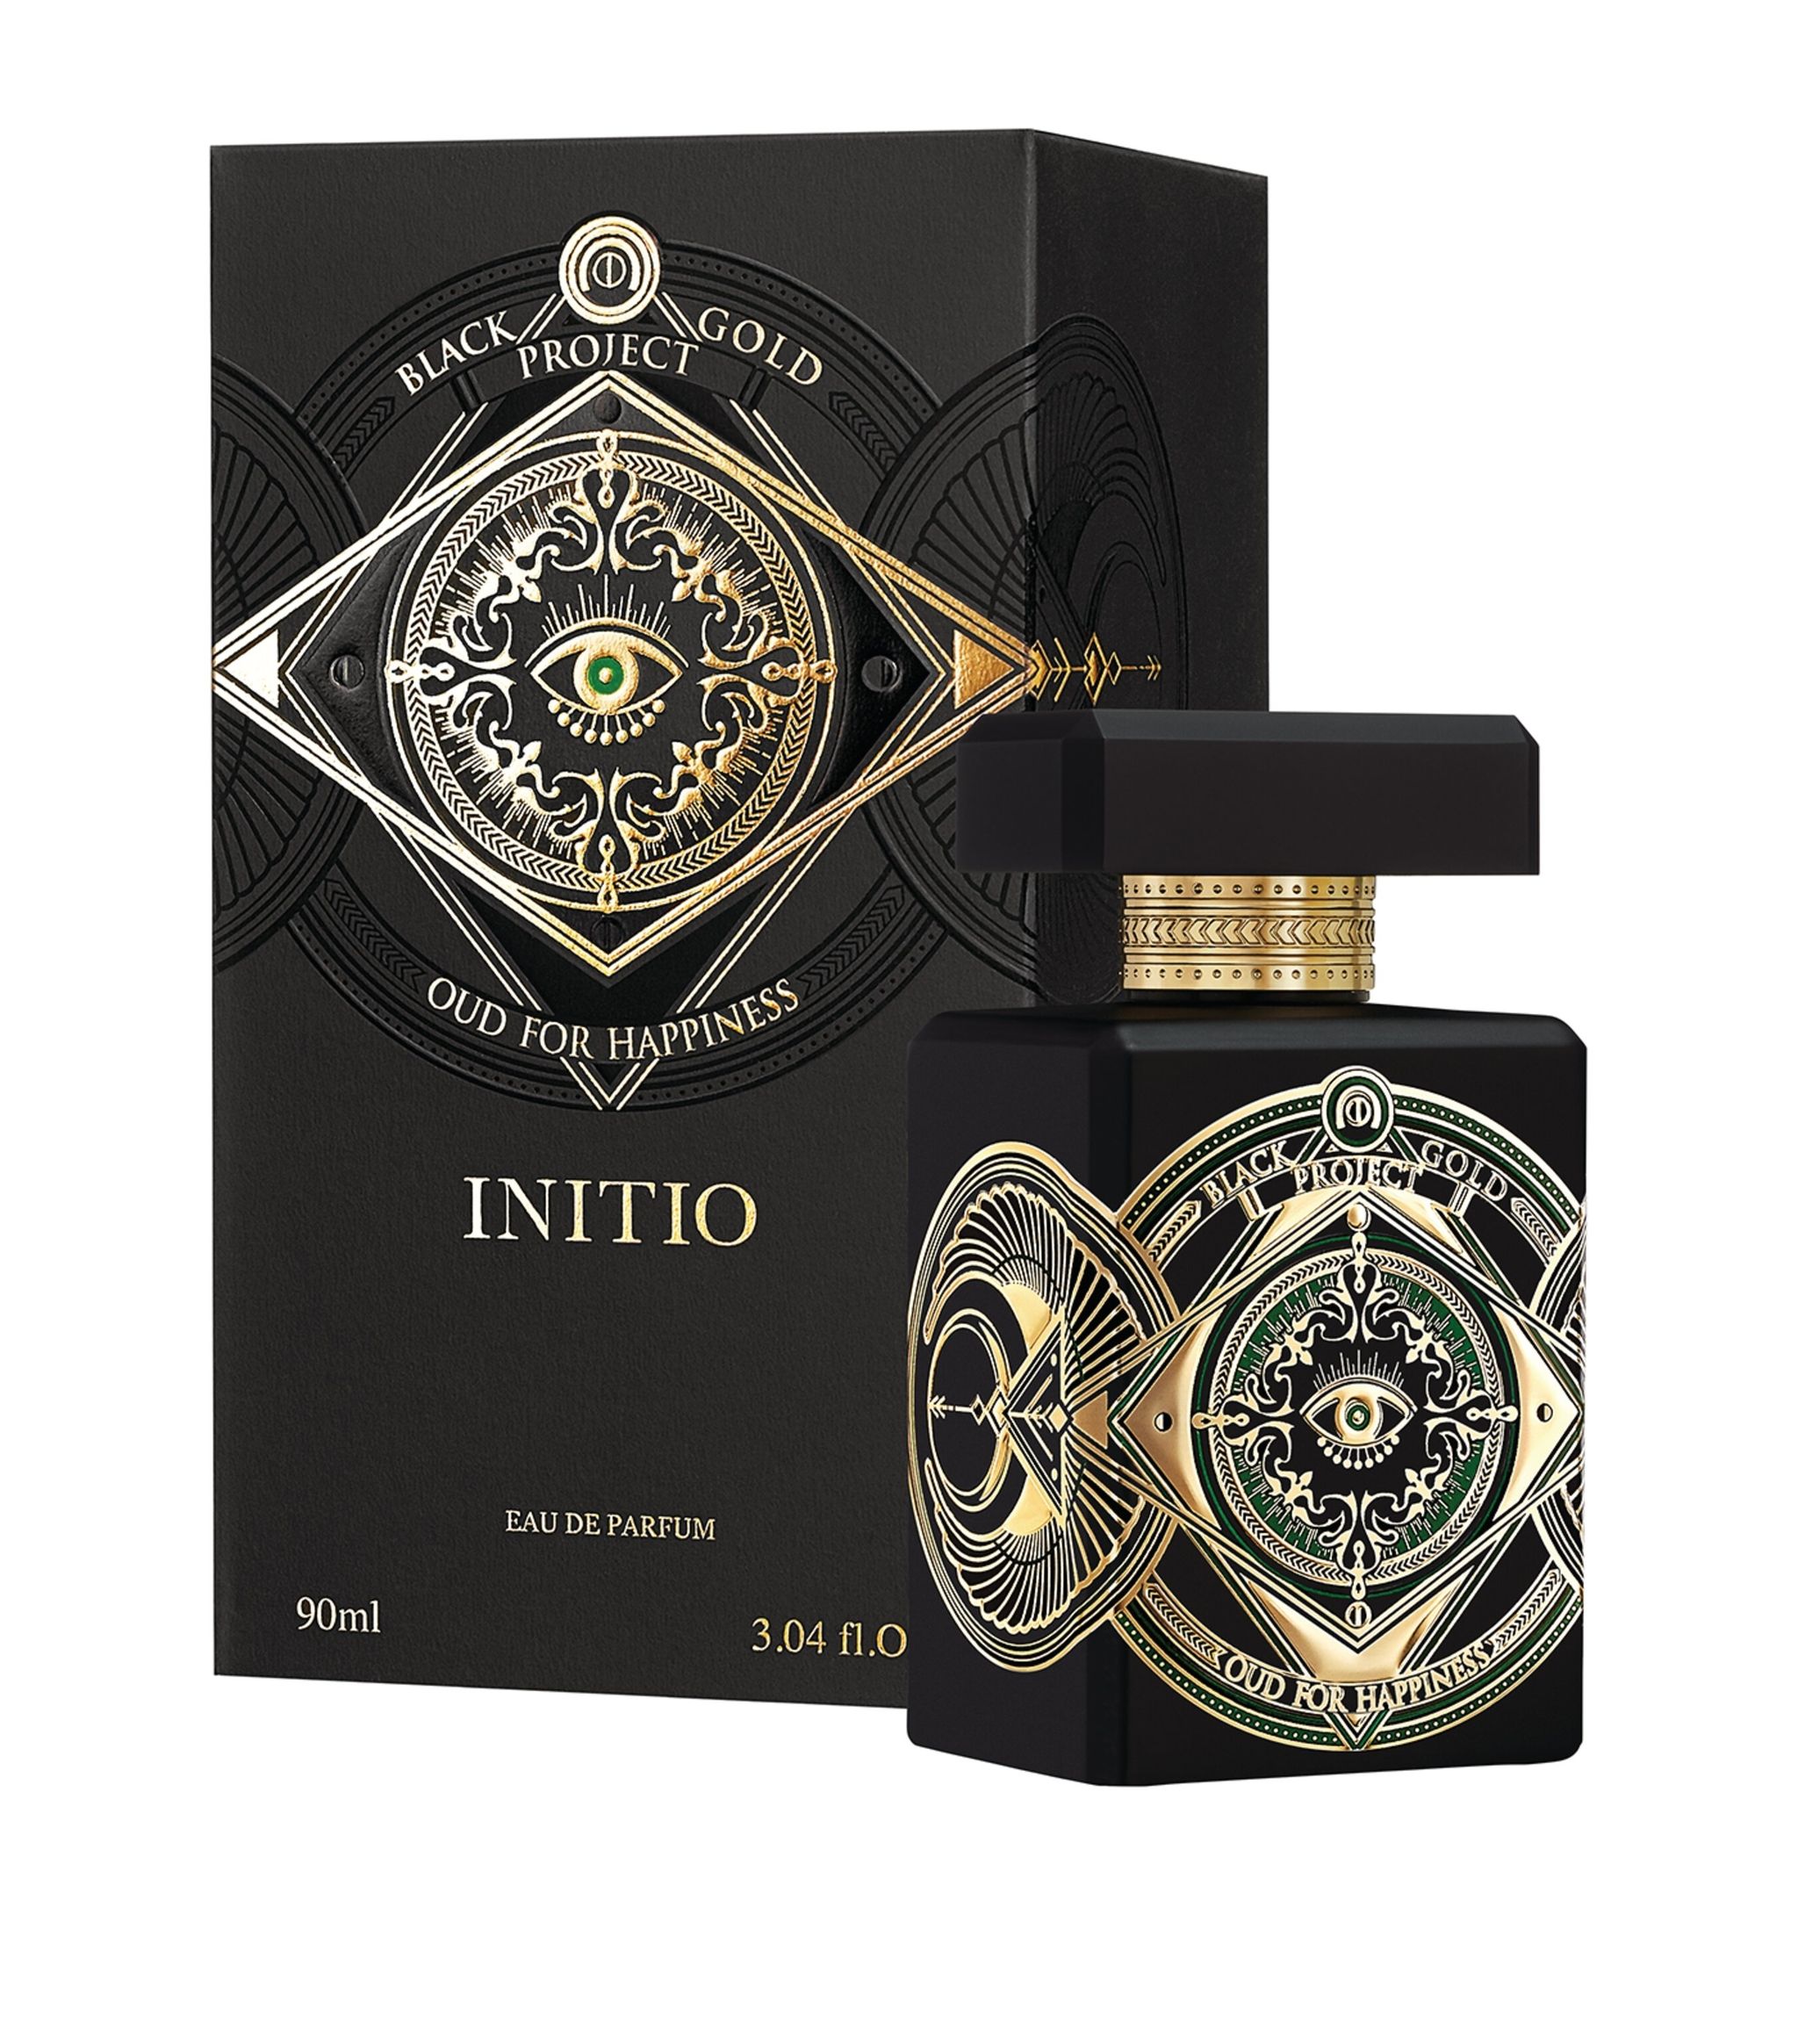 Perfume Initio Oud for Happiness Edp 90ml Unisex